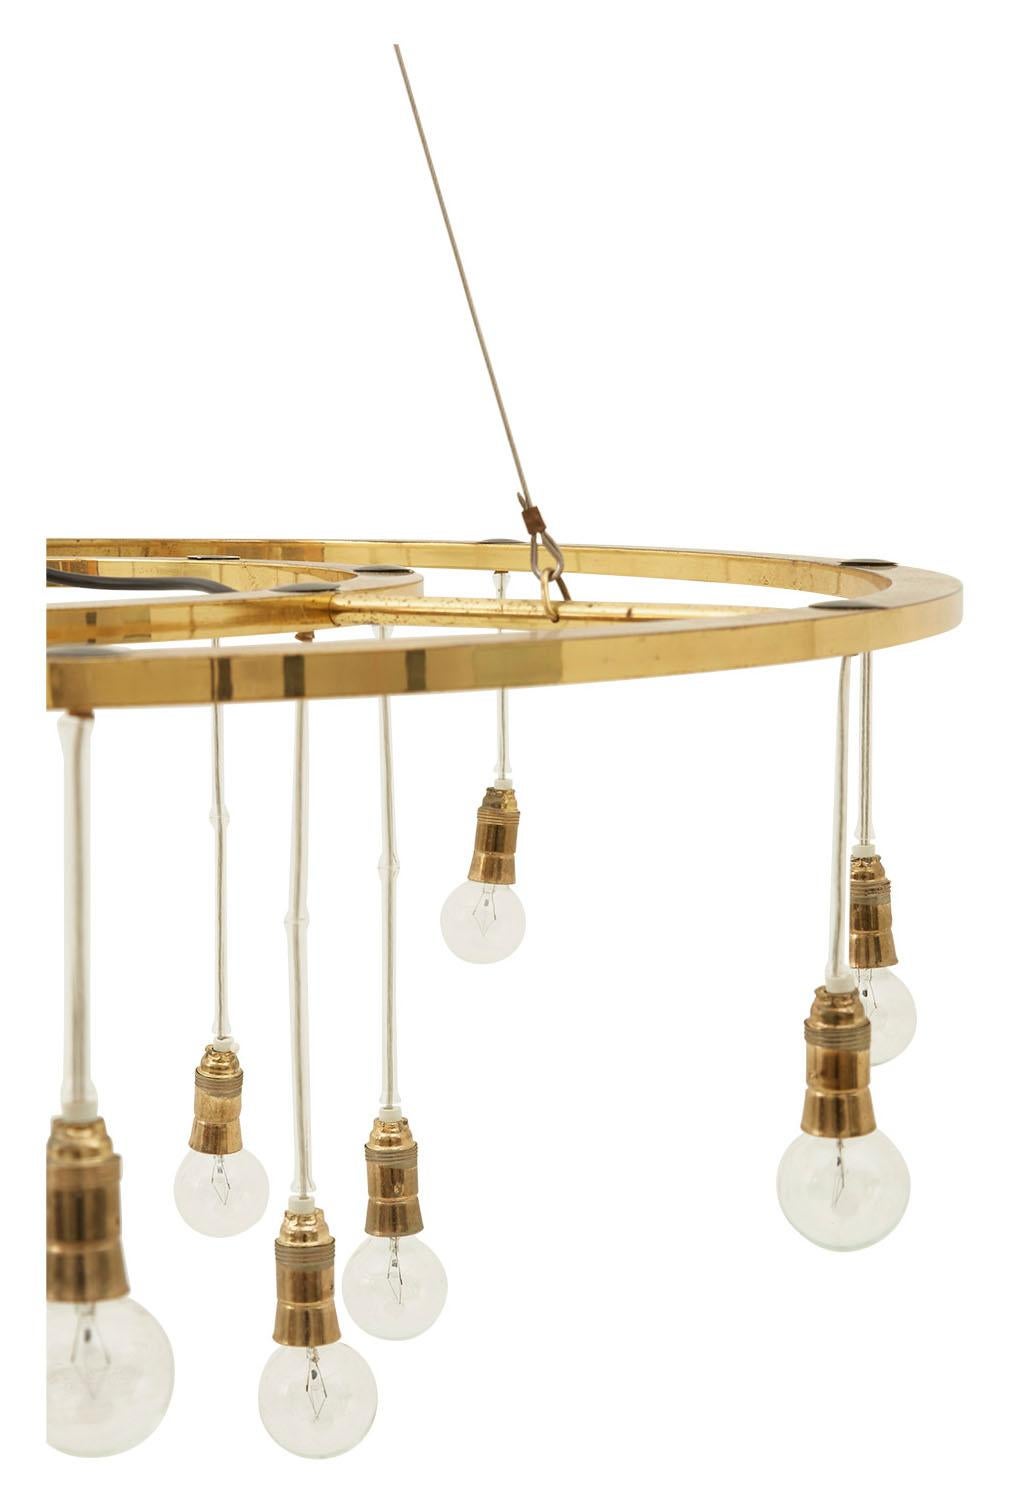 • Brass frame and canopy
• Lights suspended from glass tubes
• Adjustable wire suspension
• Rewired
• 20th century
• Spain.
• Measures: 39.5